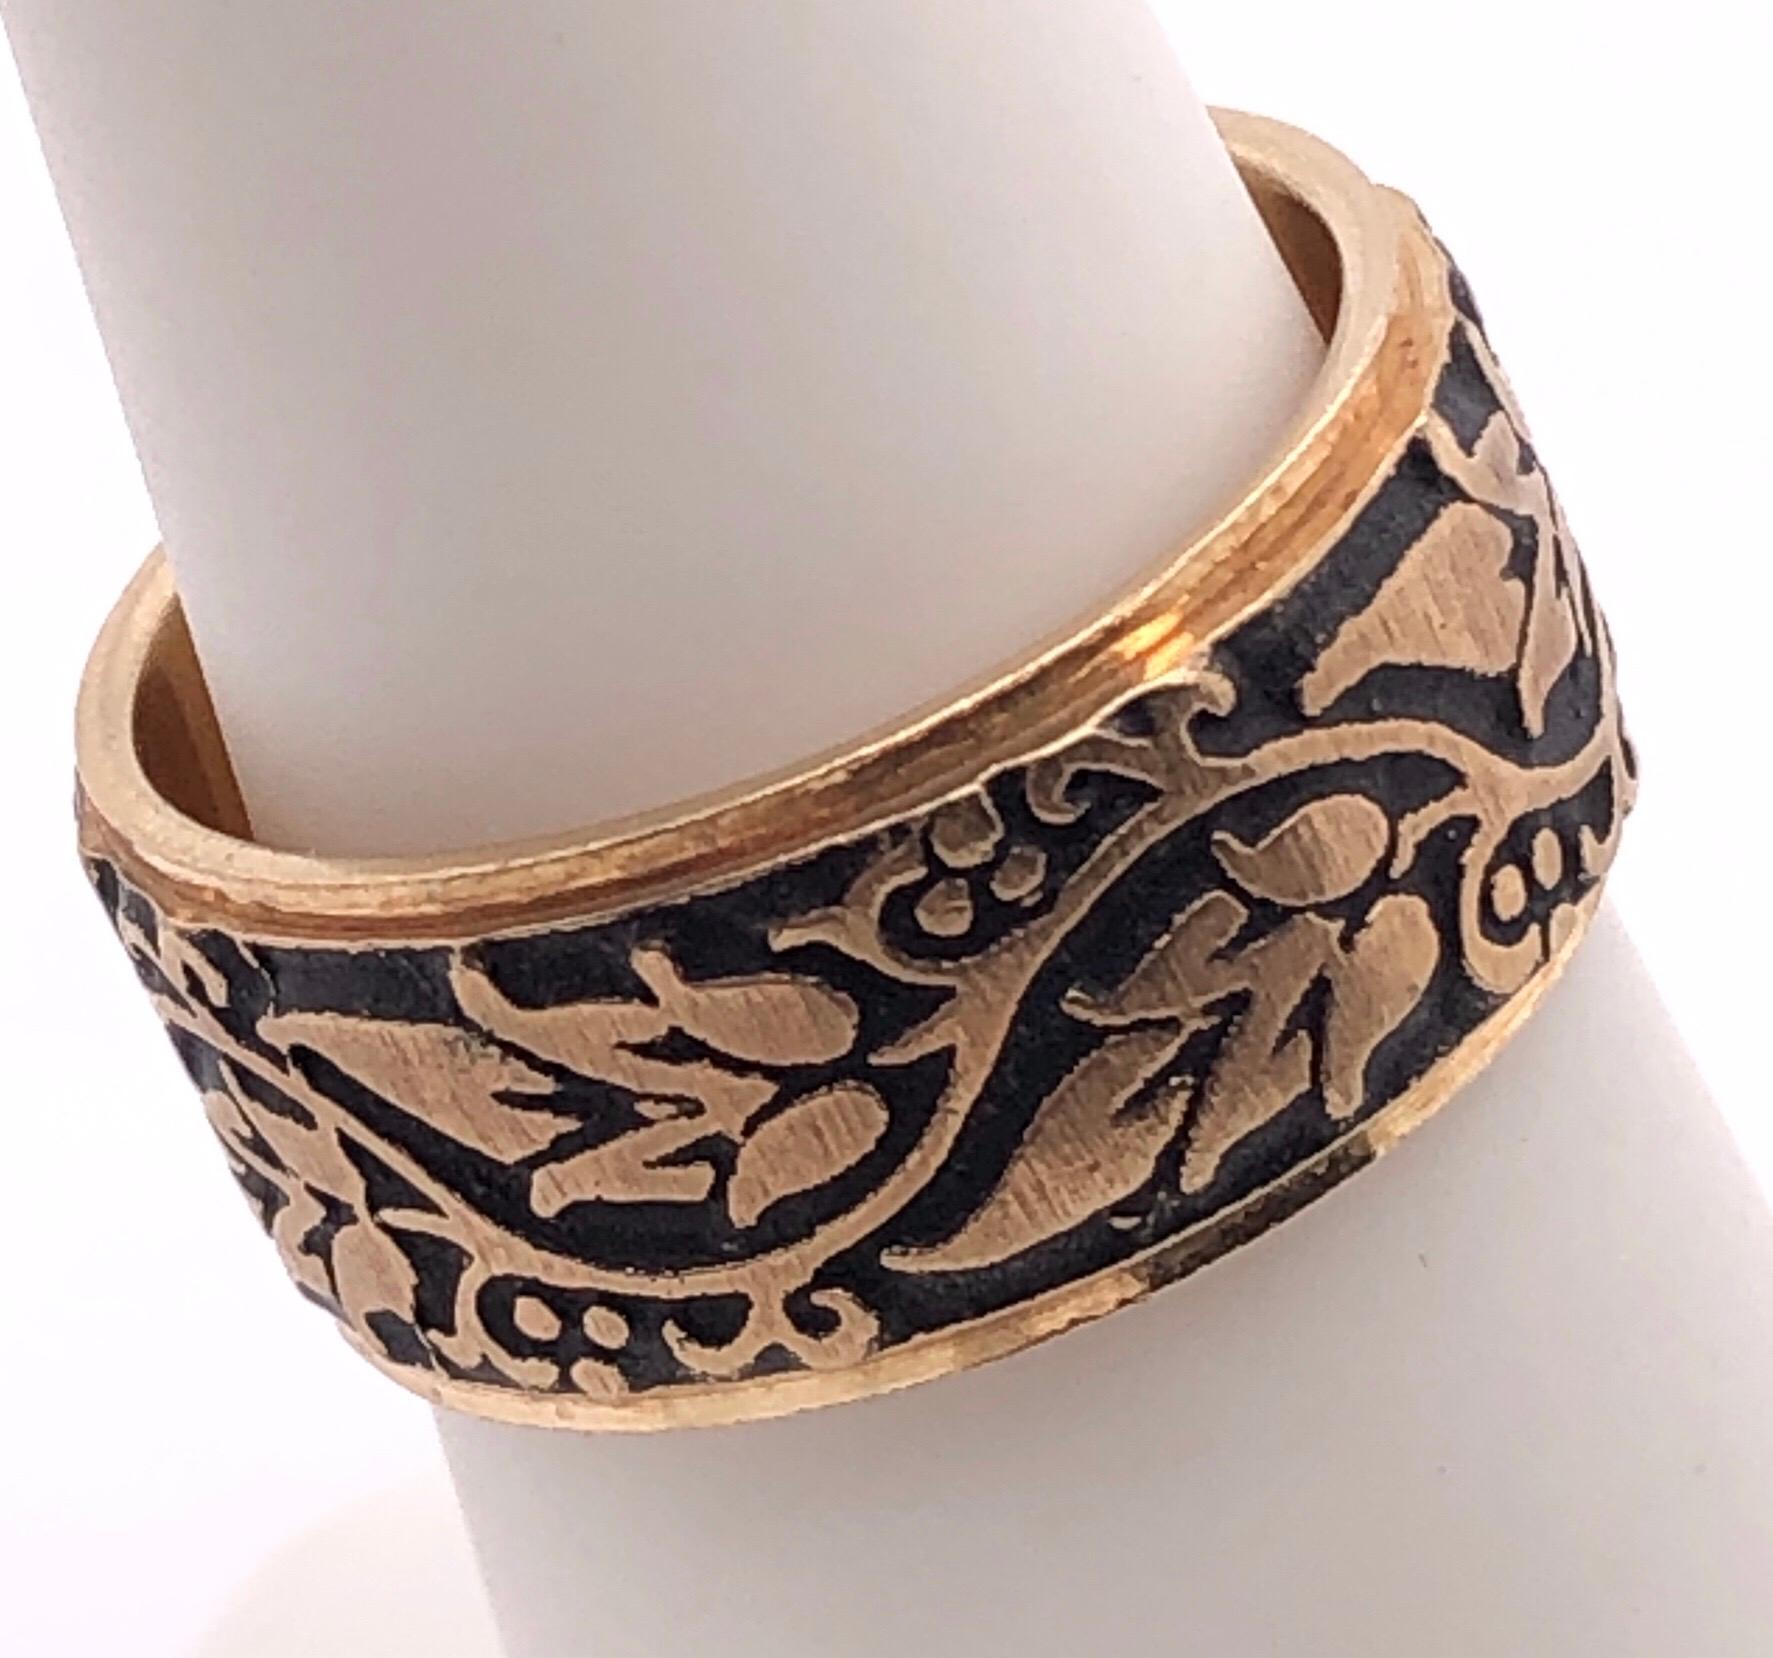 14 Karat Yellow Gold Continuous Etched Floral Wedding Band / Wedding Ring In Good Condition For Sale In Stamford, CT